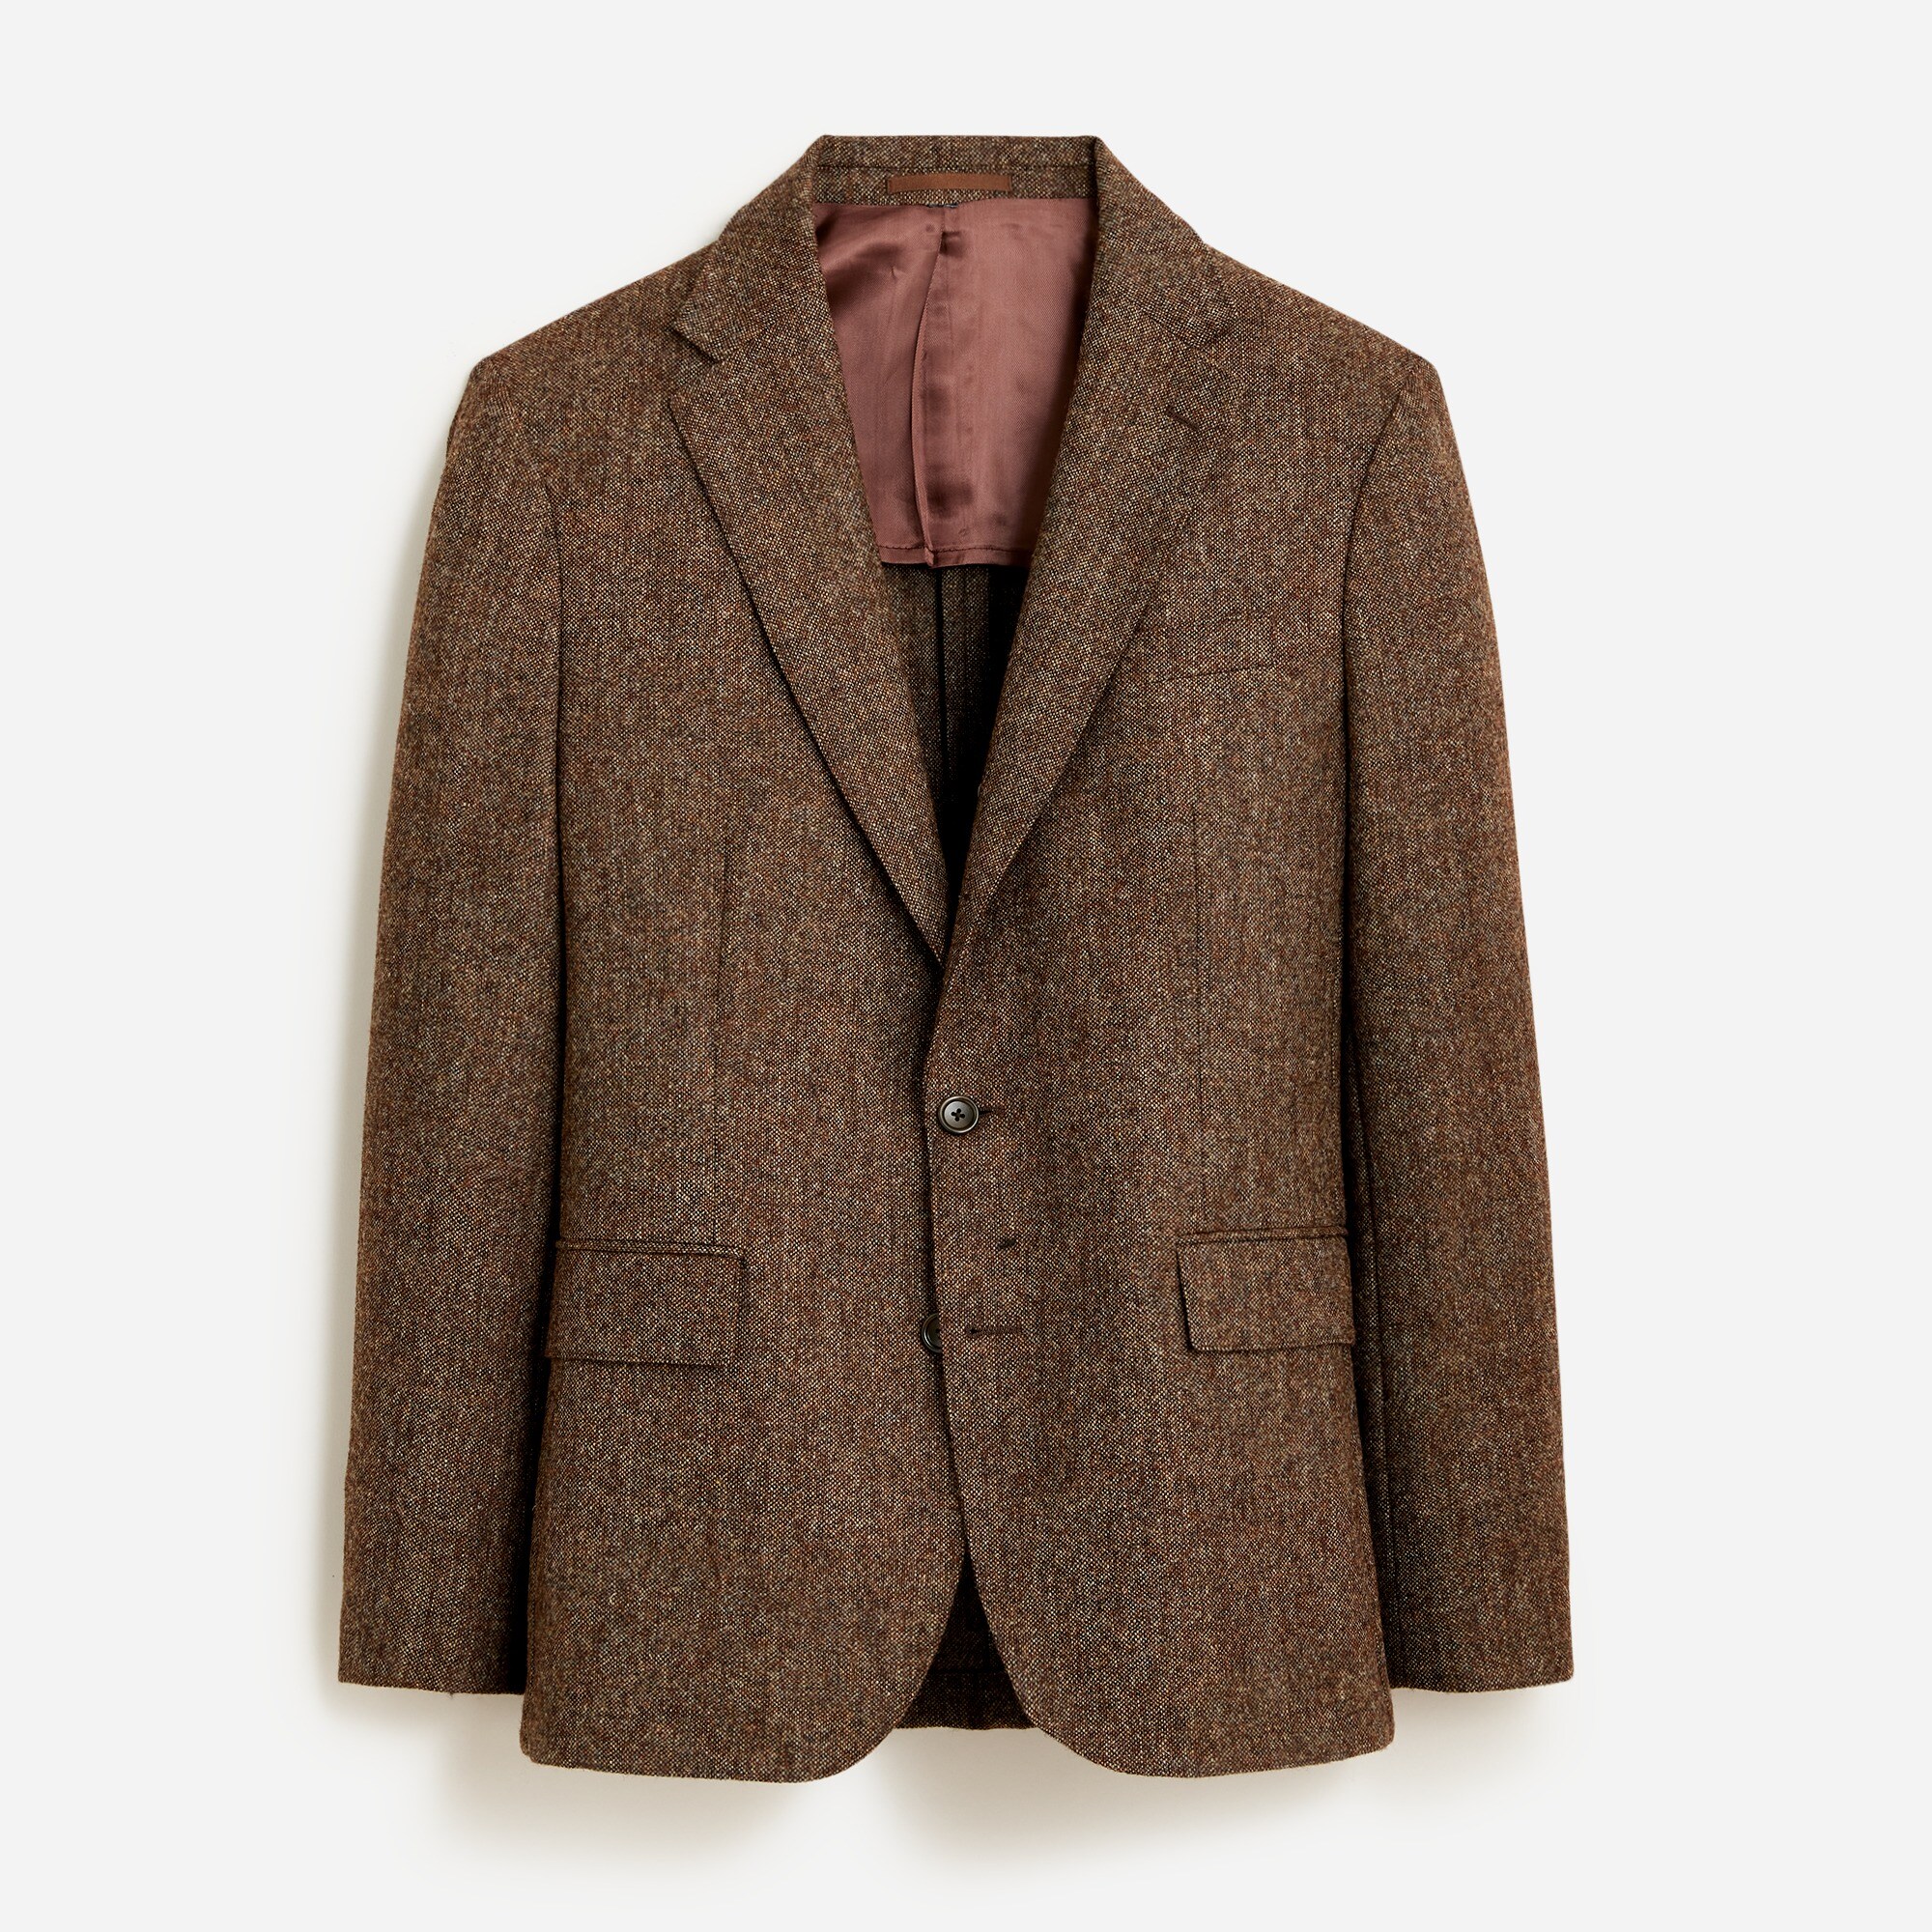  Crosby Classic-fit suit jacket in English wool tweed